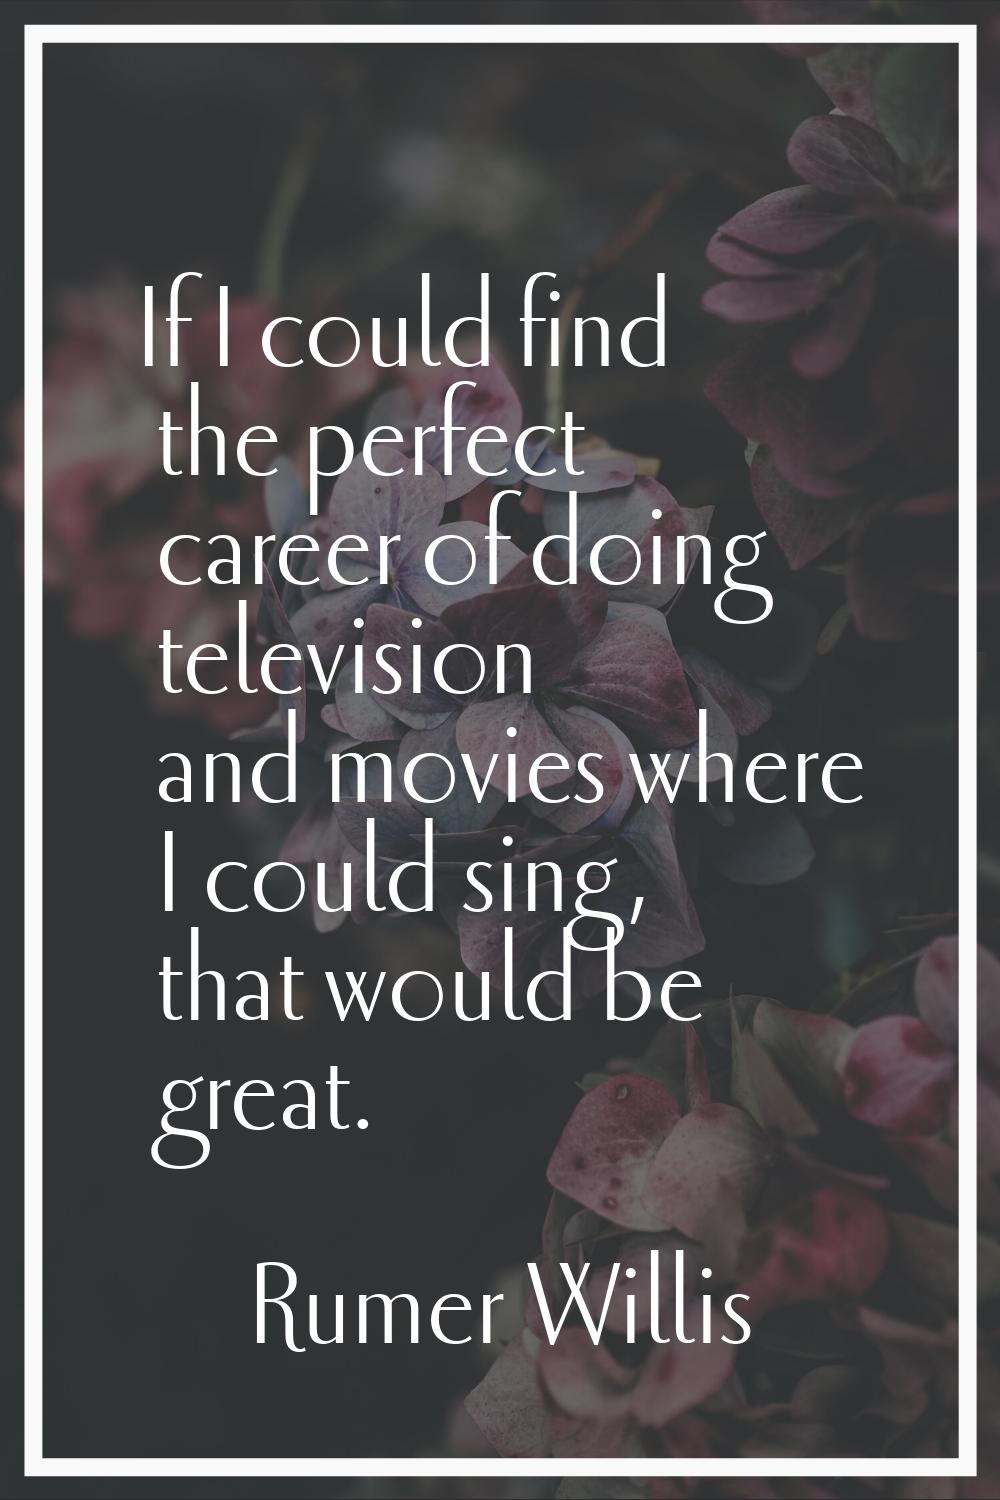 If I could find the perfect career of doing television and movies where I could sing, that would be